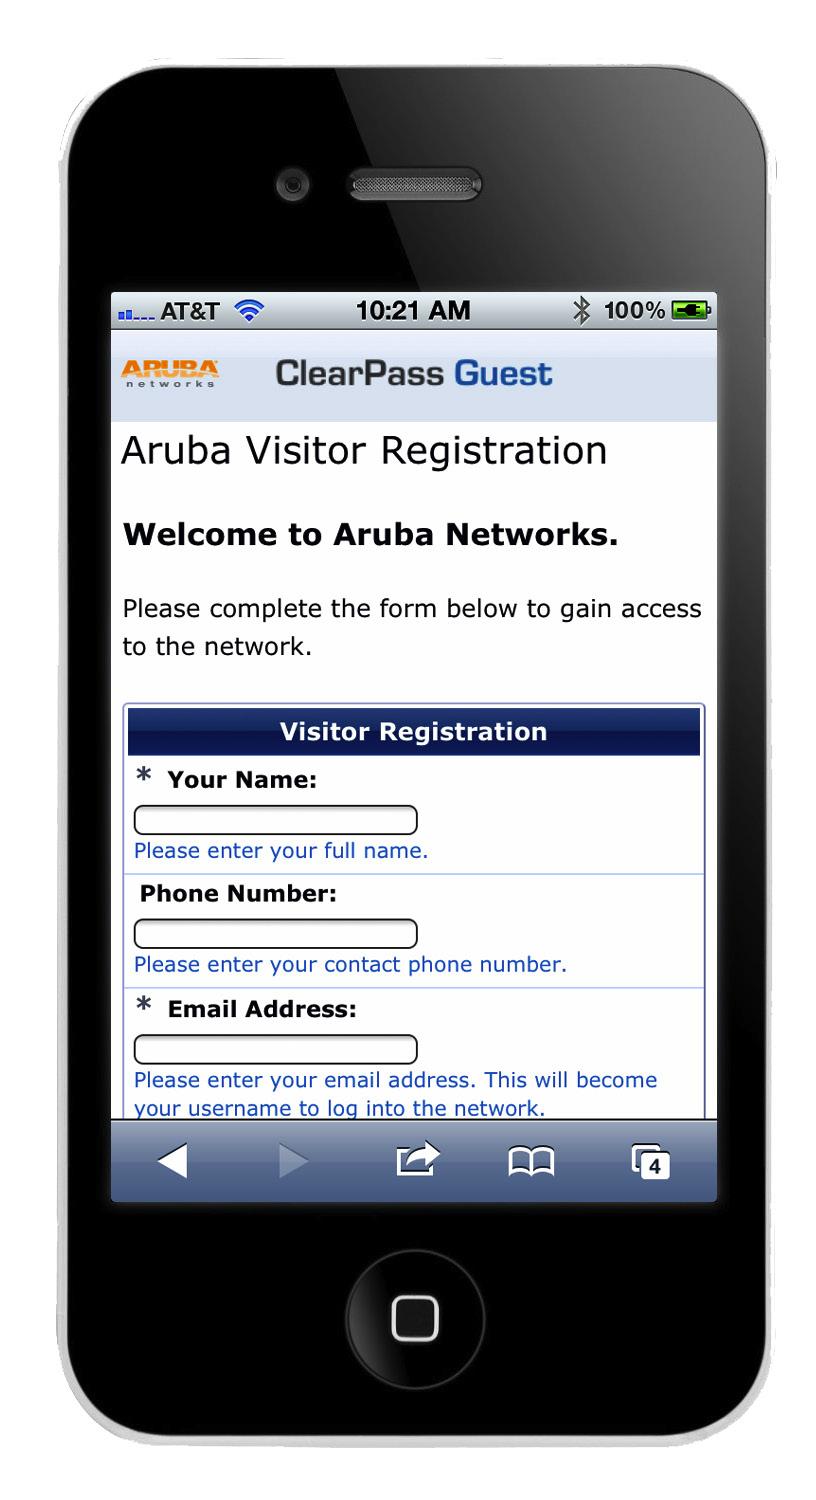 ClearPass Guest works with InstantOS to provide consistent access policies for guests, temporary workers or other transient employees across multiple controllerless Aruba Instant networks.